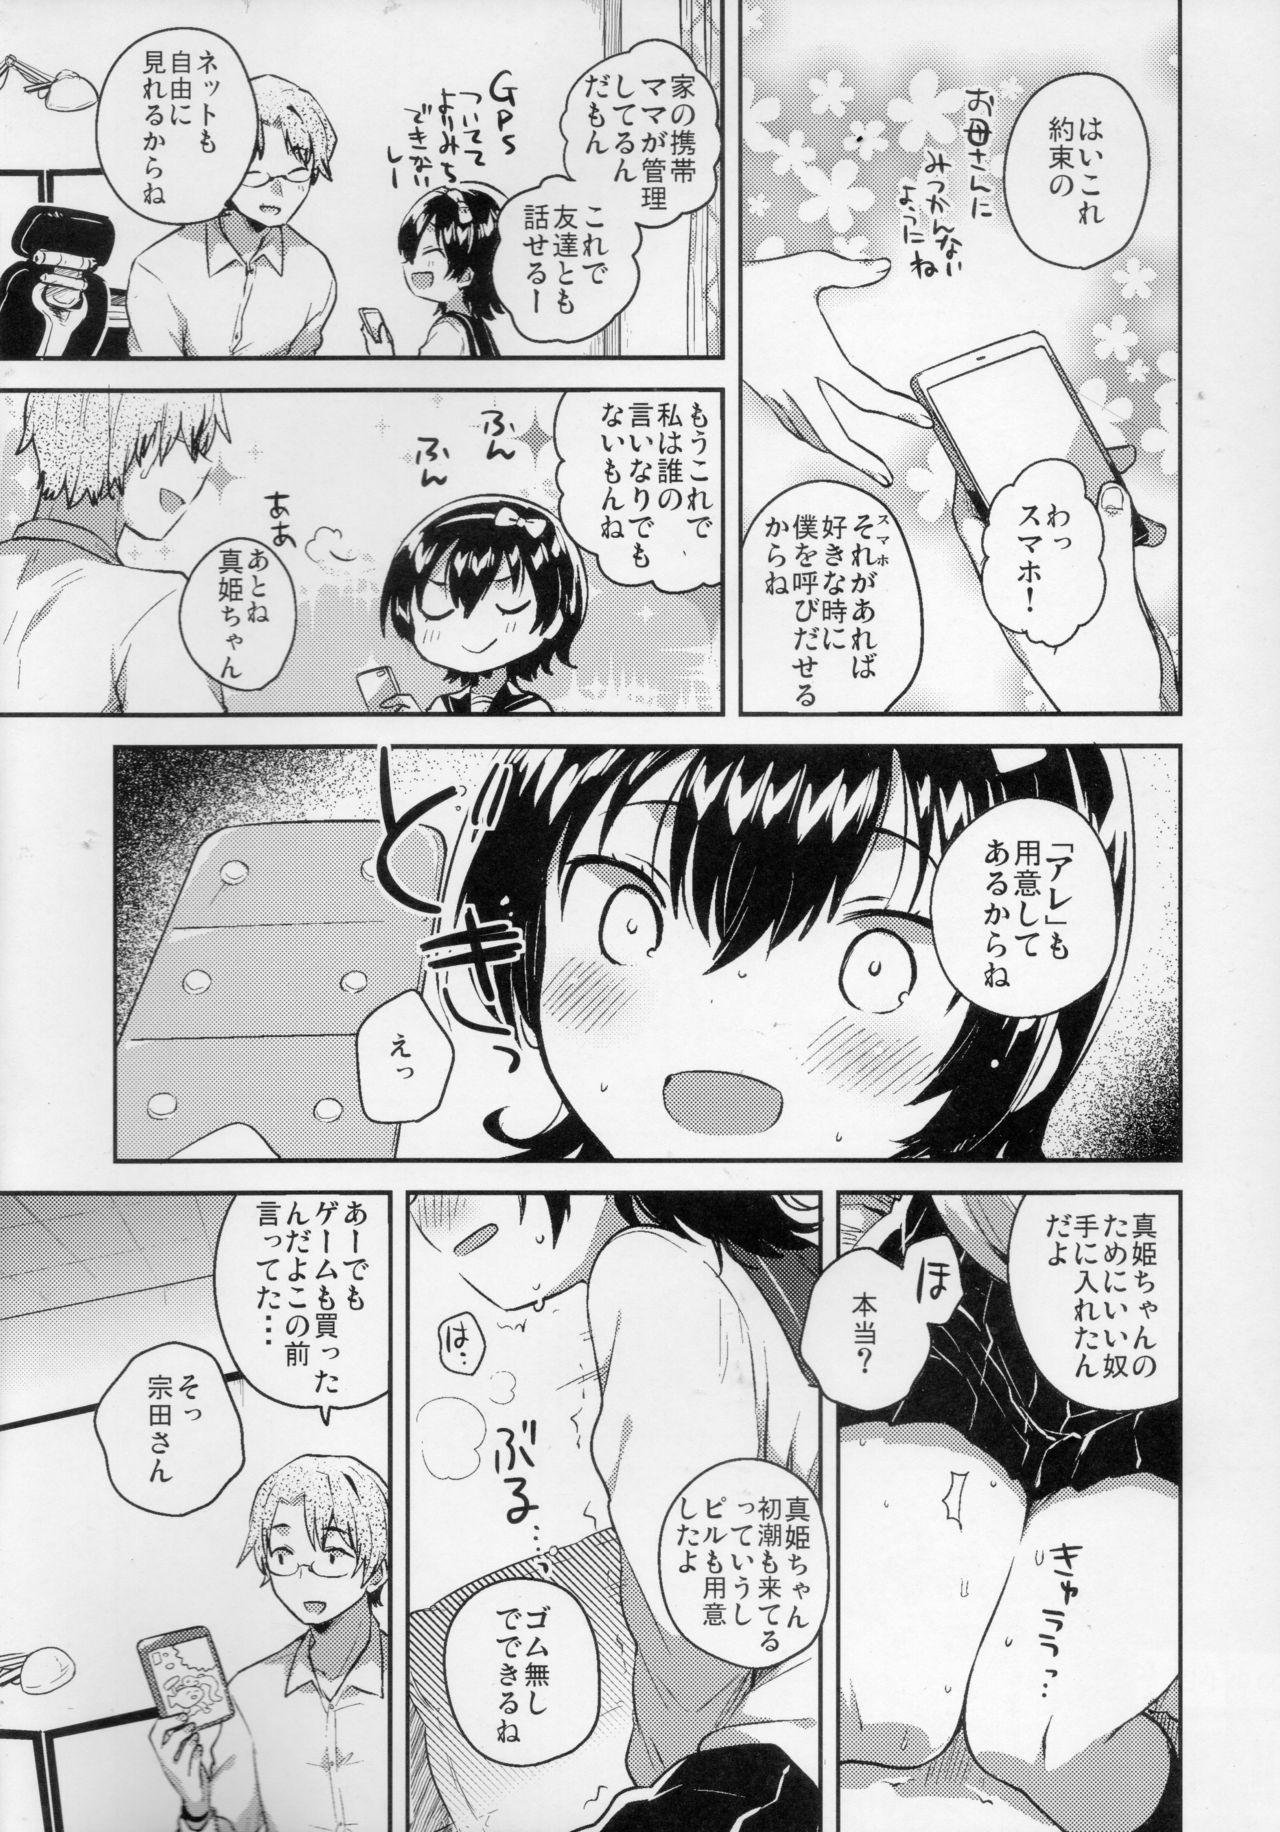 Gay Shop Anoko wa Marionette - She Is marionette - Original Perfect Tits - Page 7